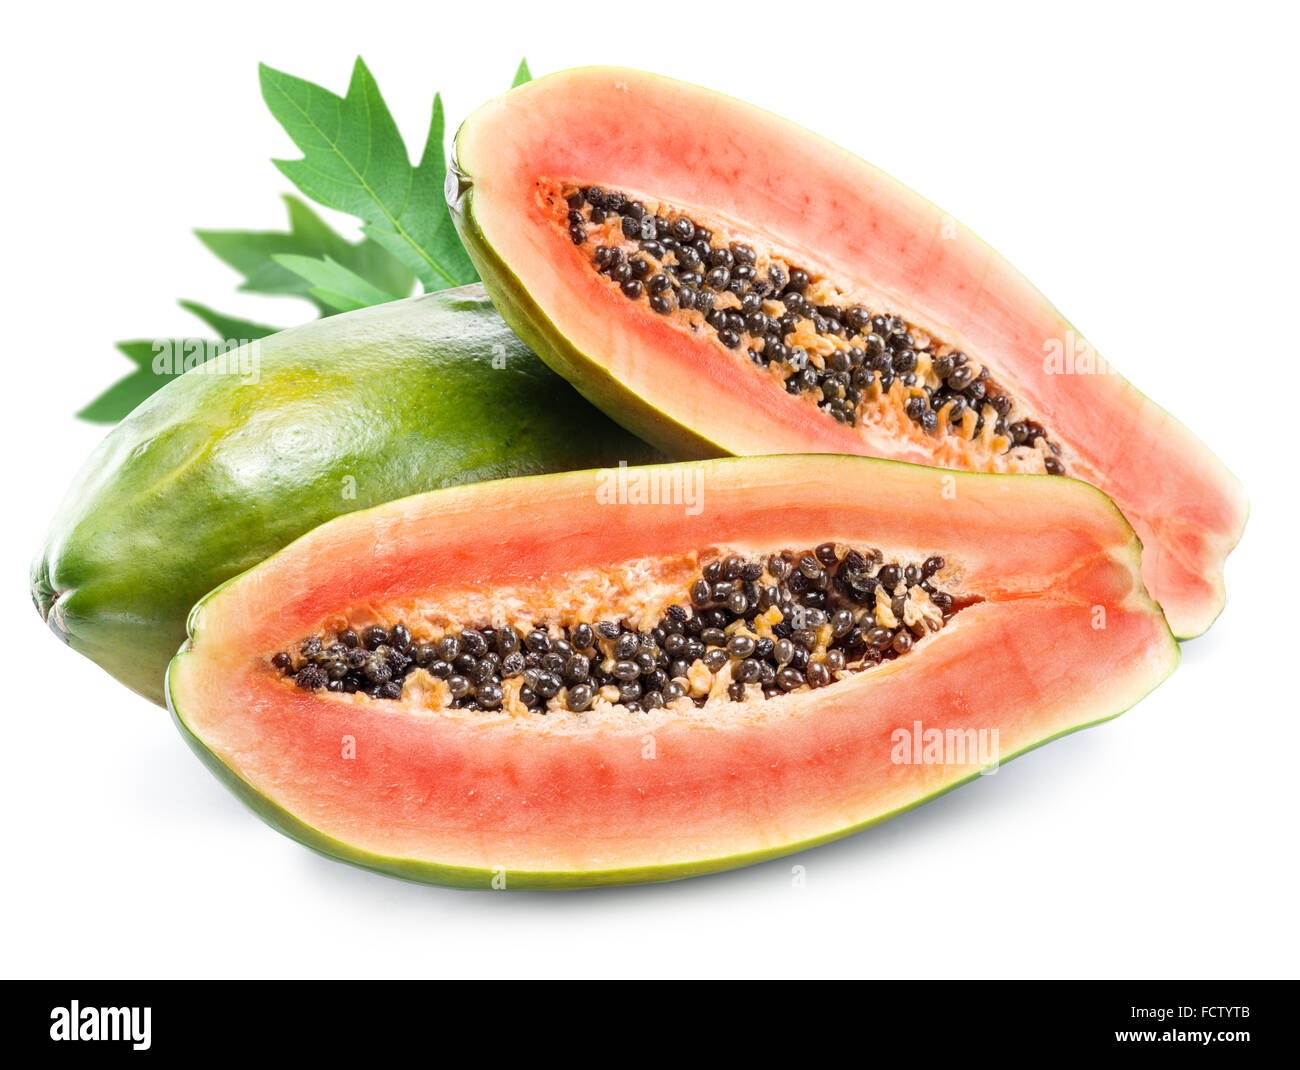 Papaya fruit isolated on a white background. File contains clipping paths. Stock Photo